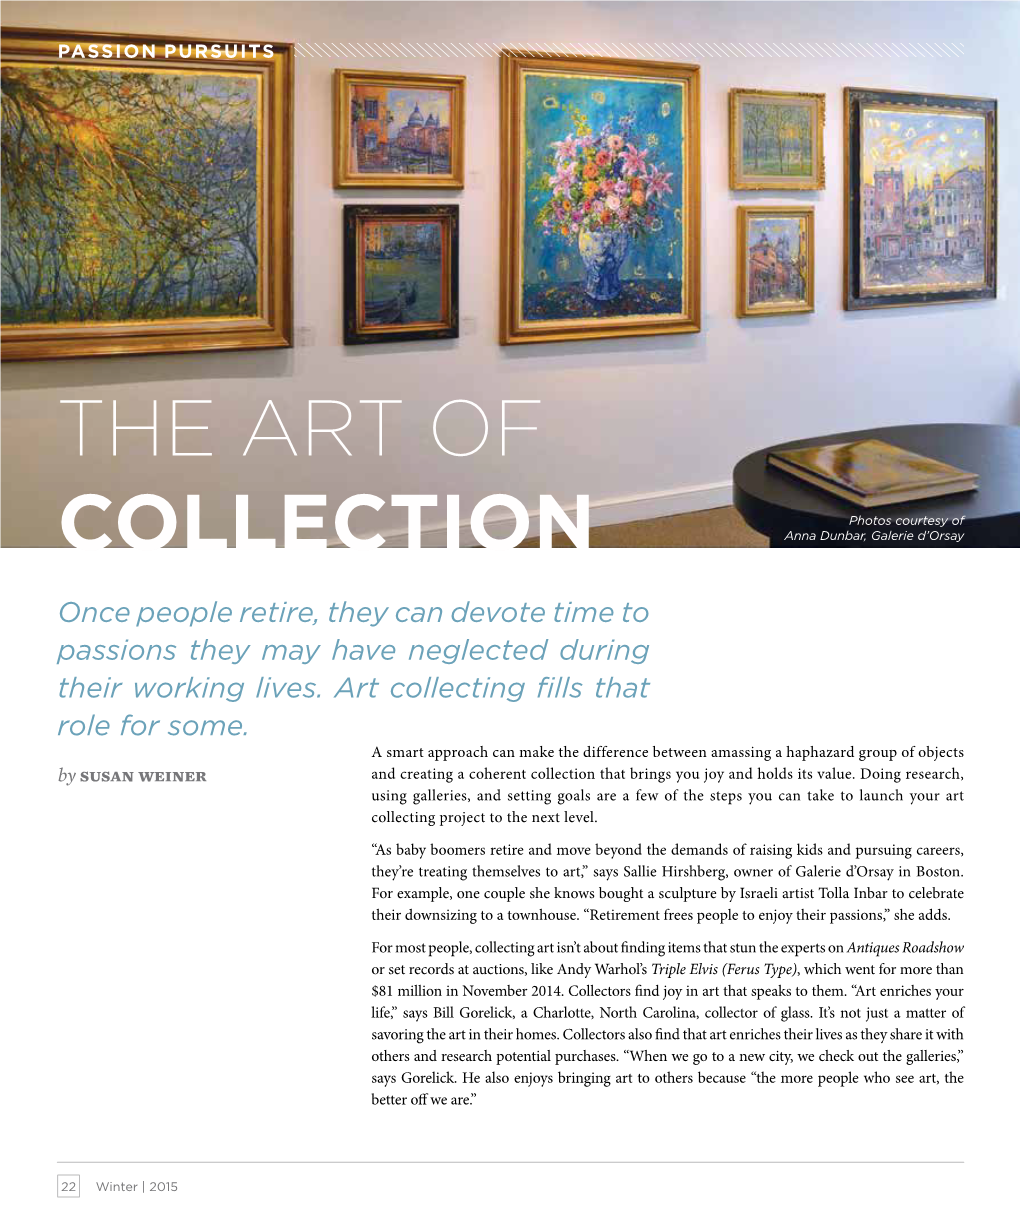 The Art of Collection